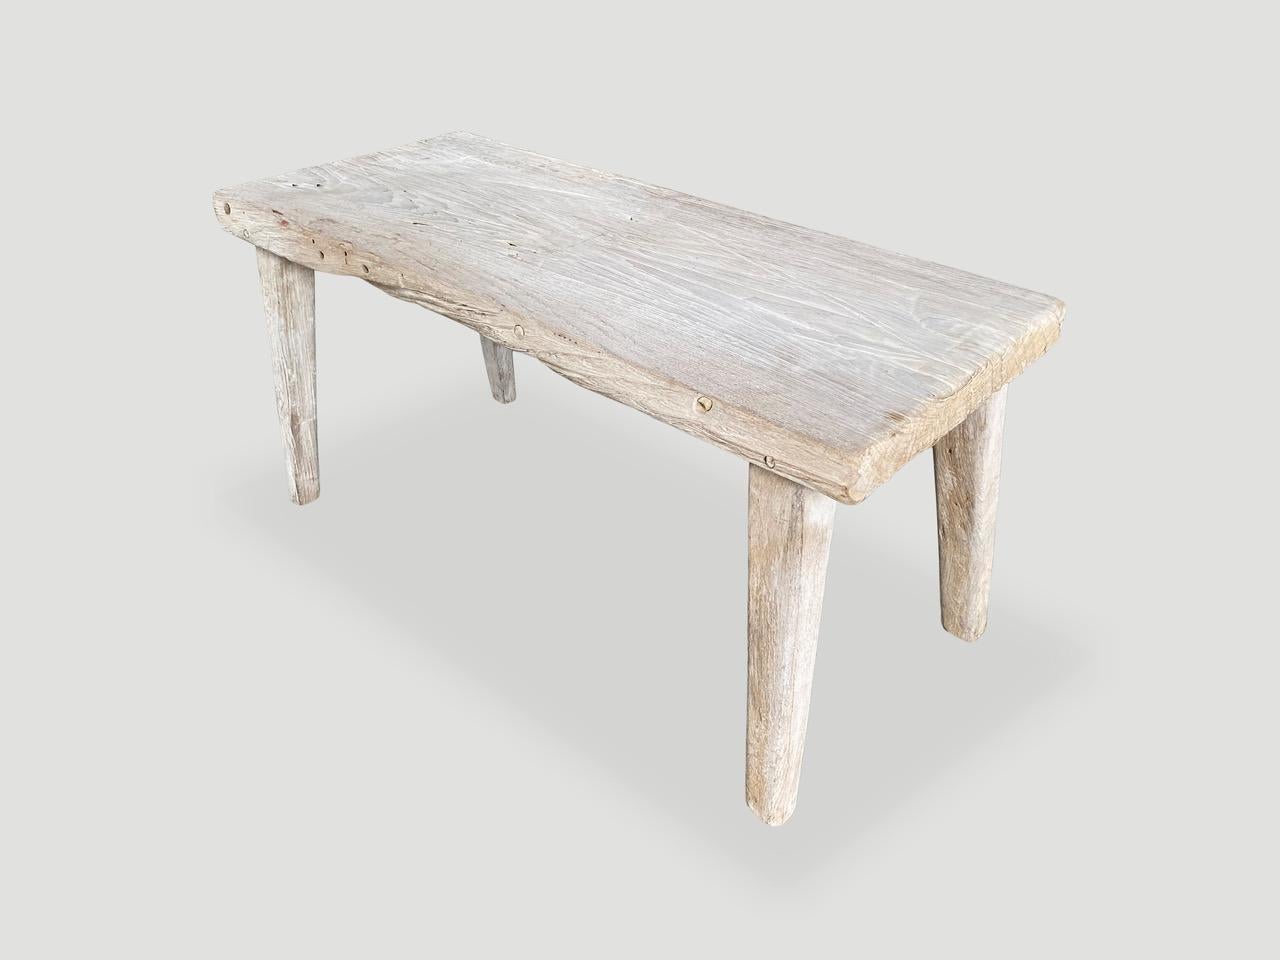 Organic Modern Andrianna Shamaris Teak Wood Antique Hand Carved Bench or Side Table For Sale